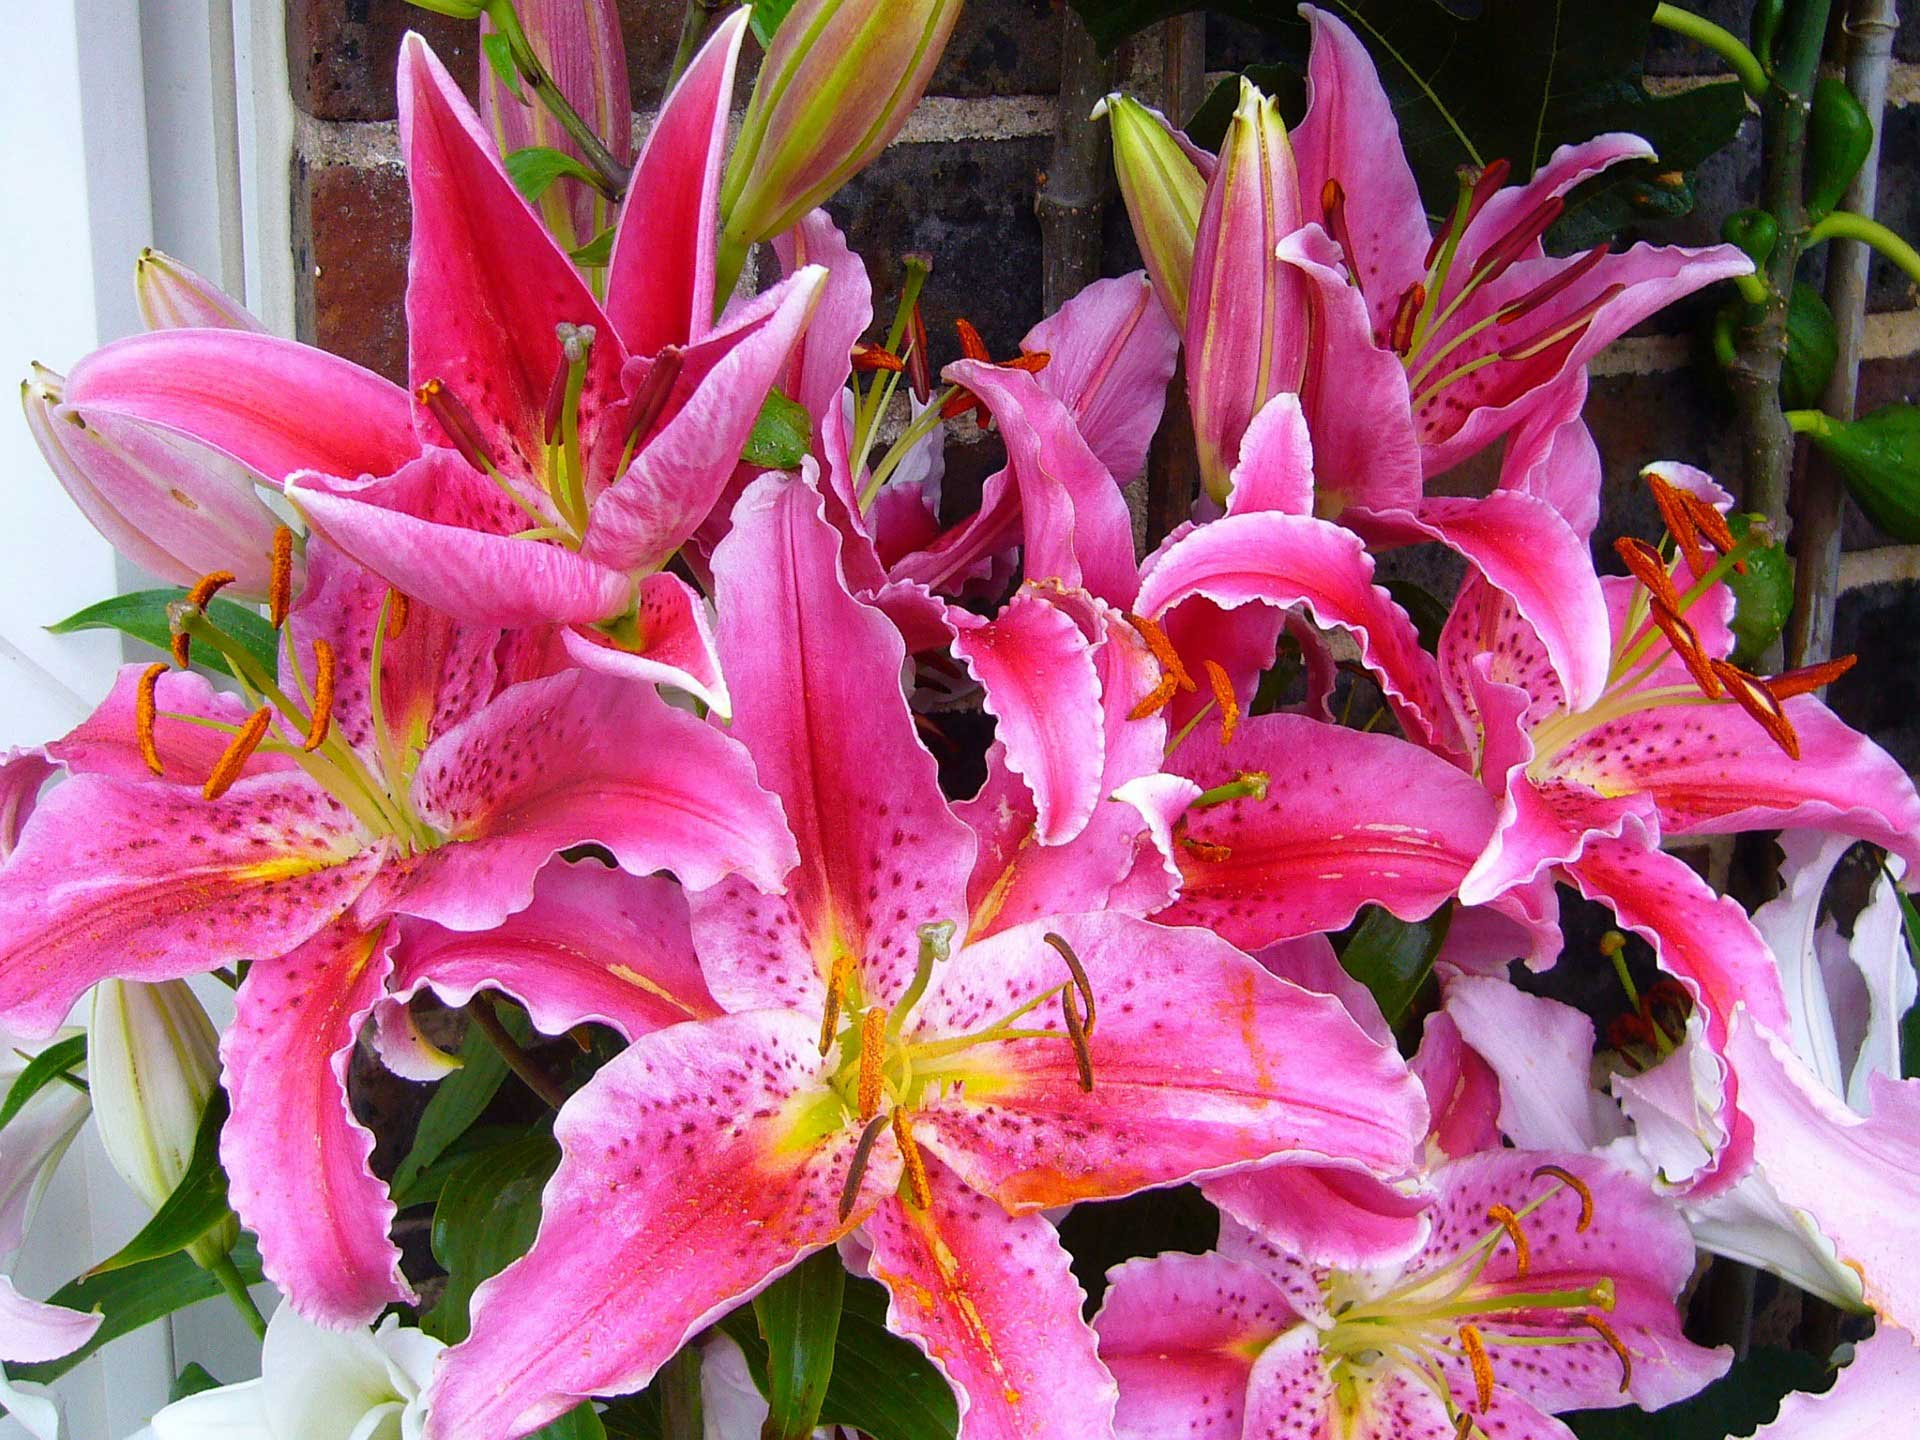 1920x1440 Stargazer Lilies Symbolizing Purity, Chastity and Virtue in Greek Mythology Learn About Nature